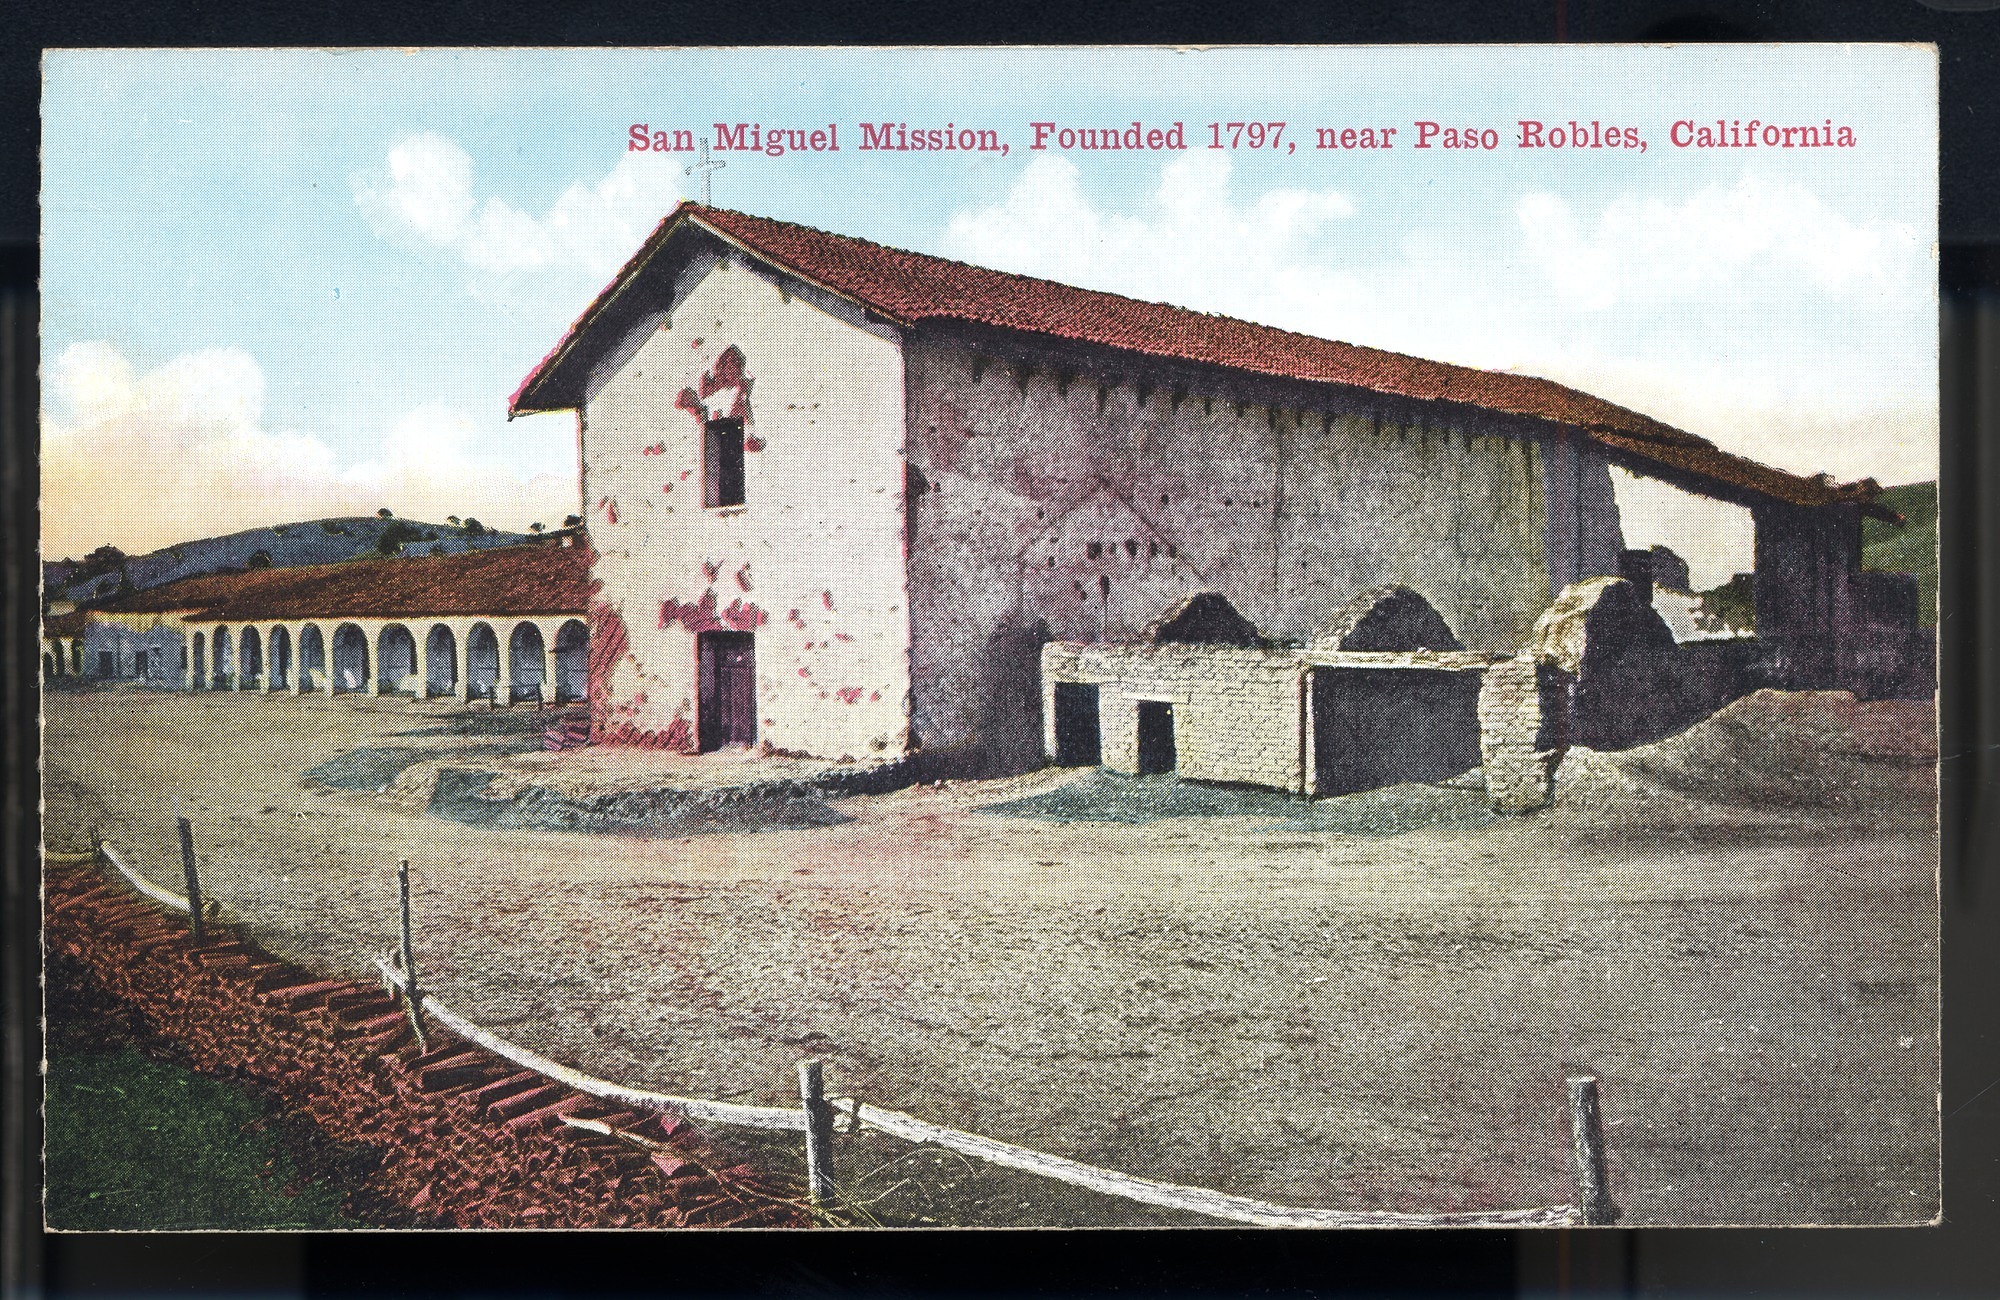 Postcard 50 – San Miguel Mission, Founded 1797, near Paso Robles, California. Van Ornum Colorprint Company. 1908-1921. NMAH 1986.0639.0494.